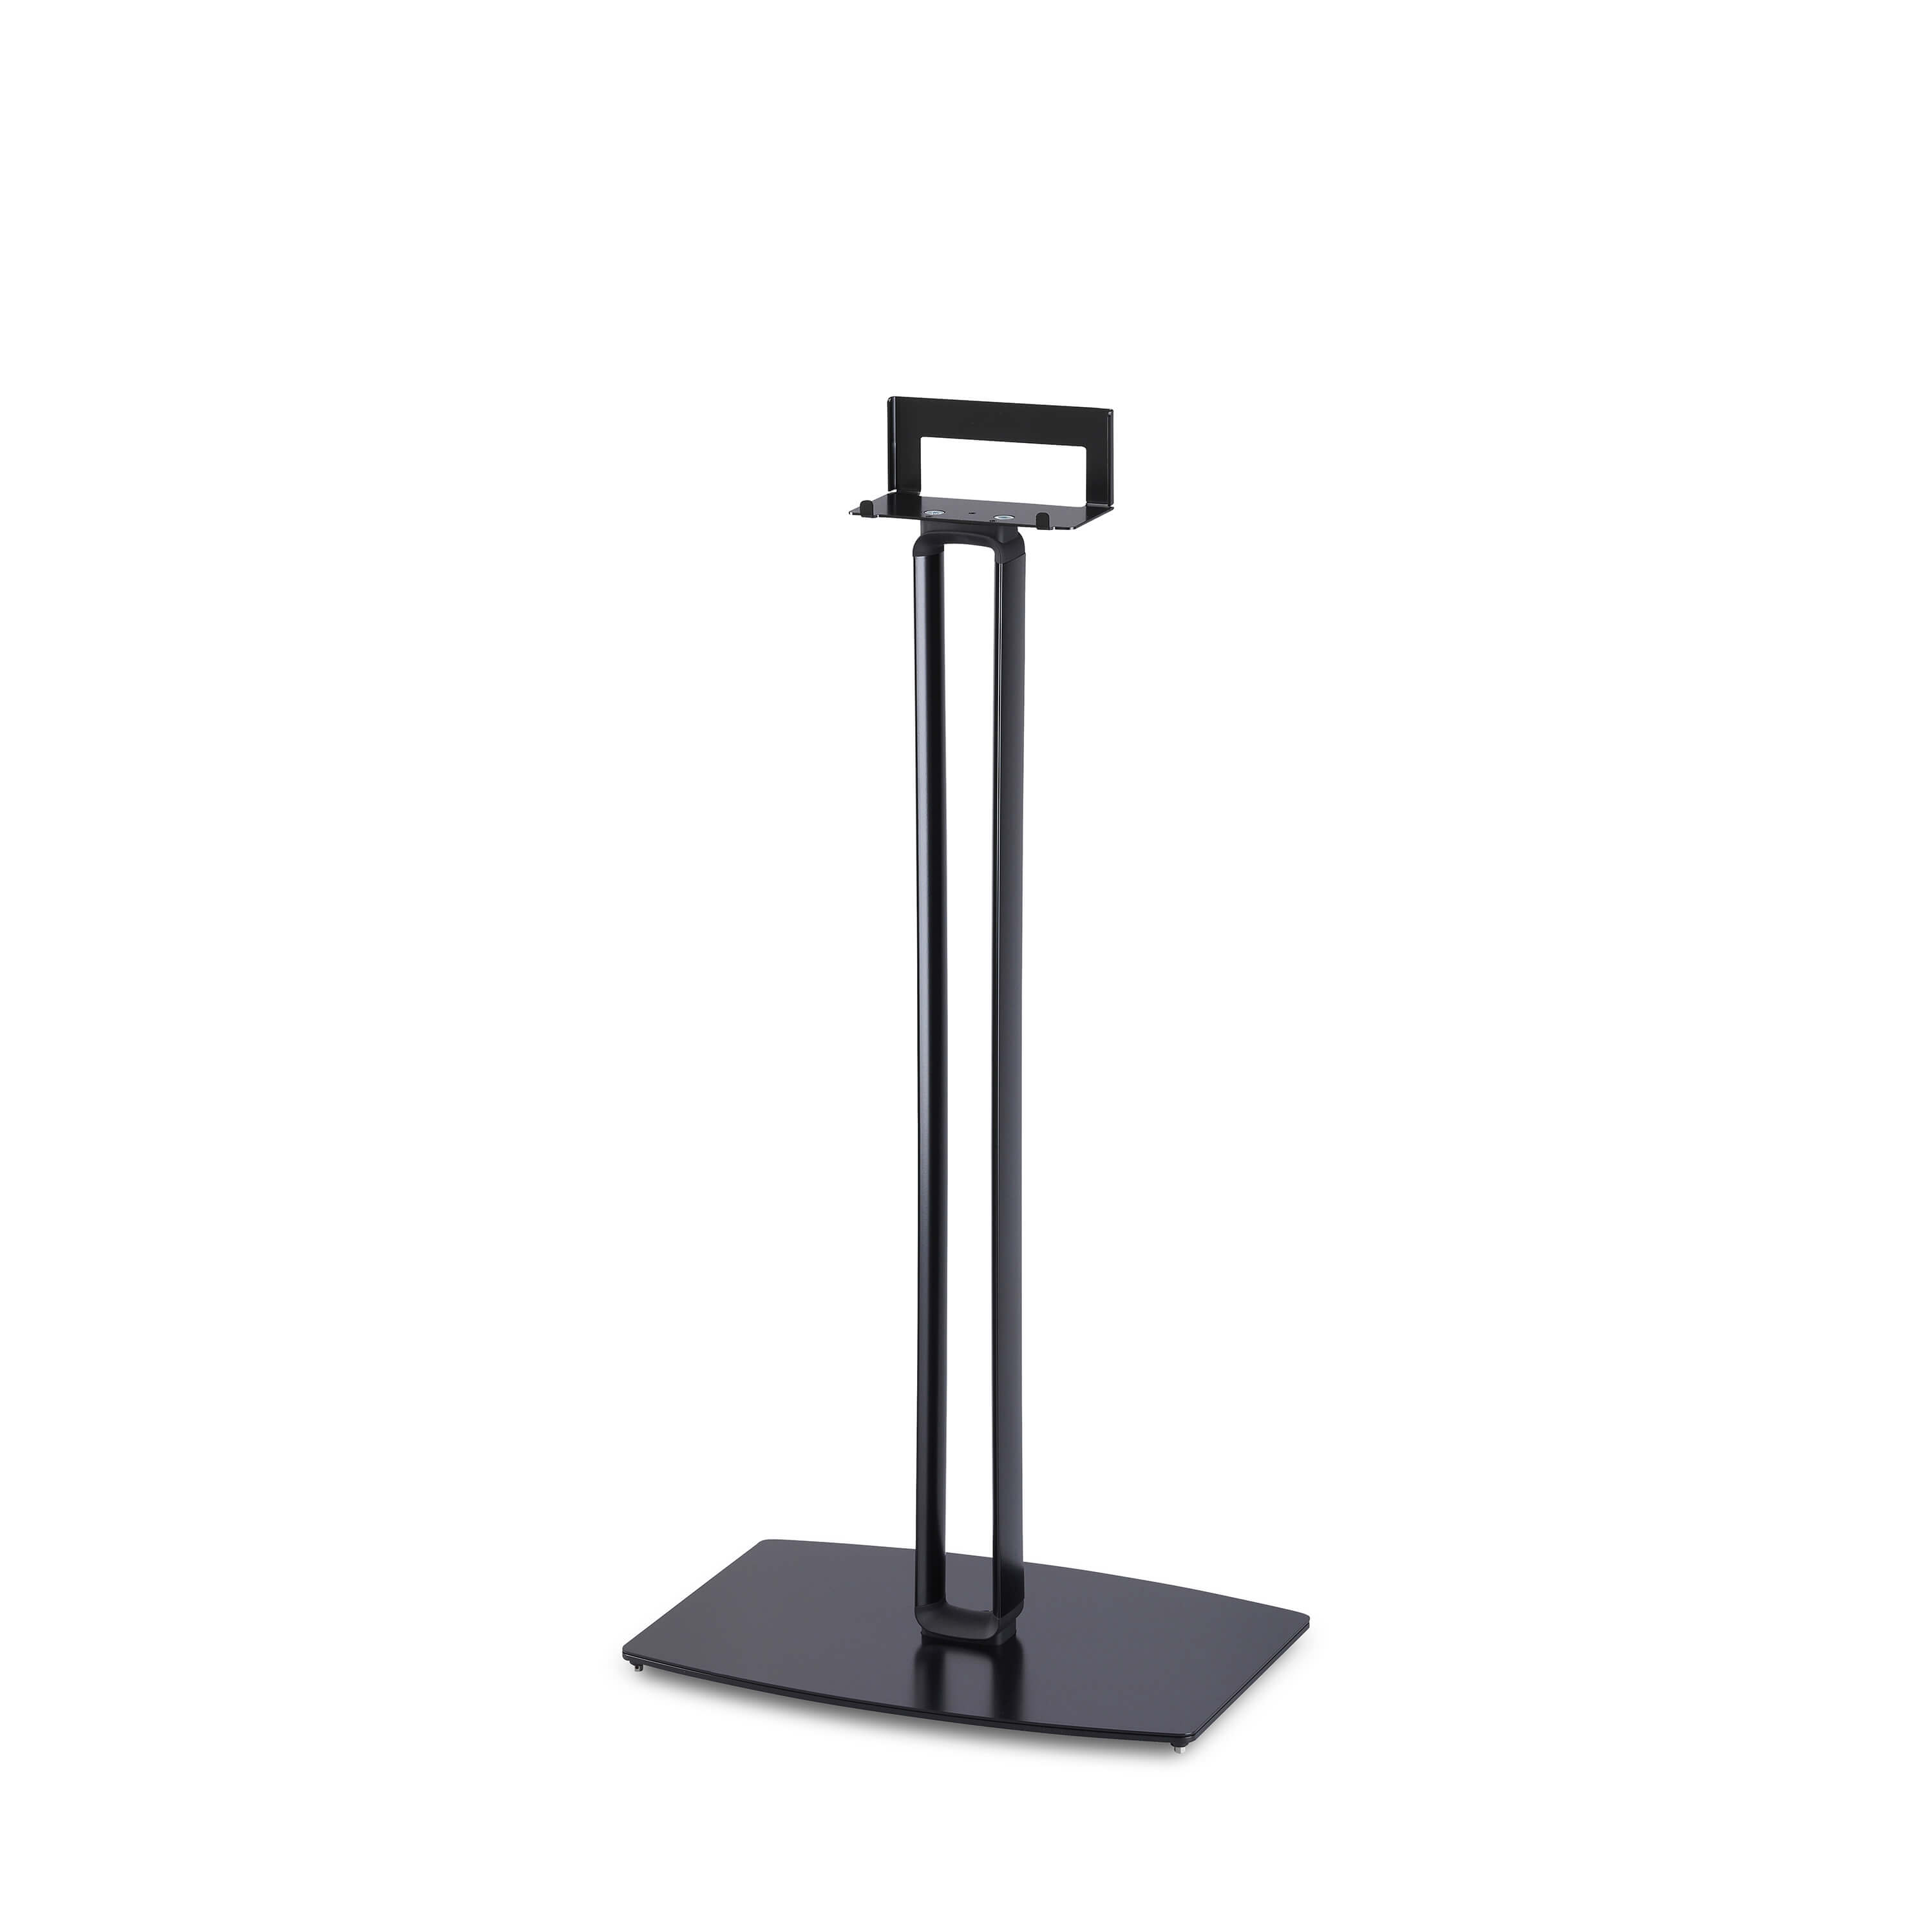 SoundXtra BOSE SOUNDTOUCH 20 Floor Stand black Singel